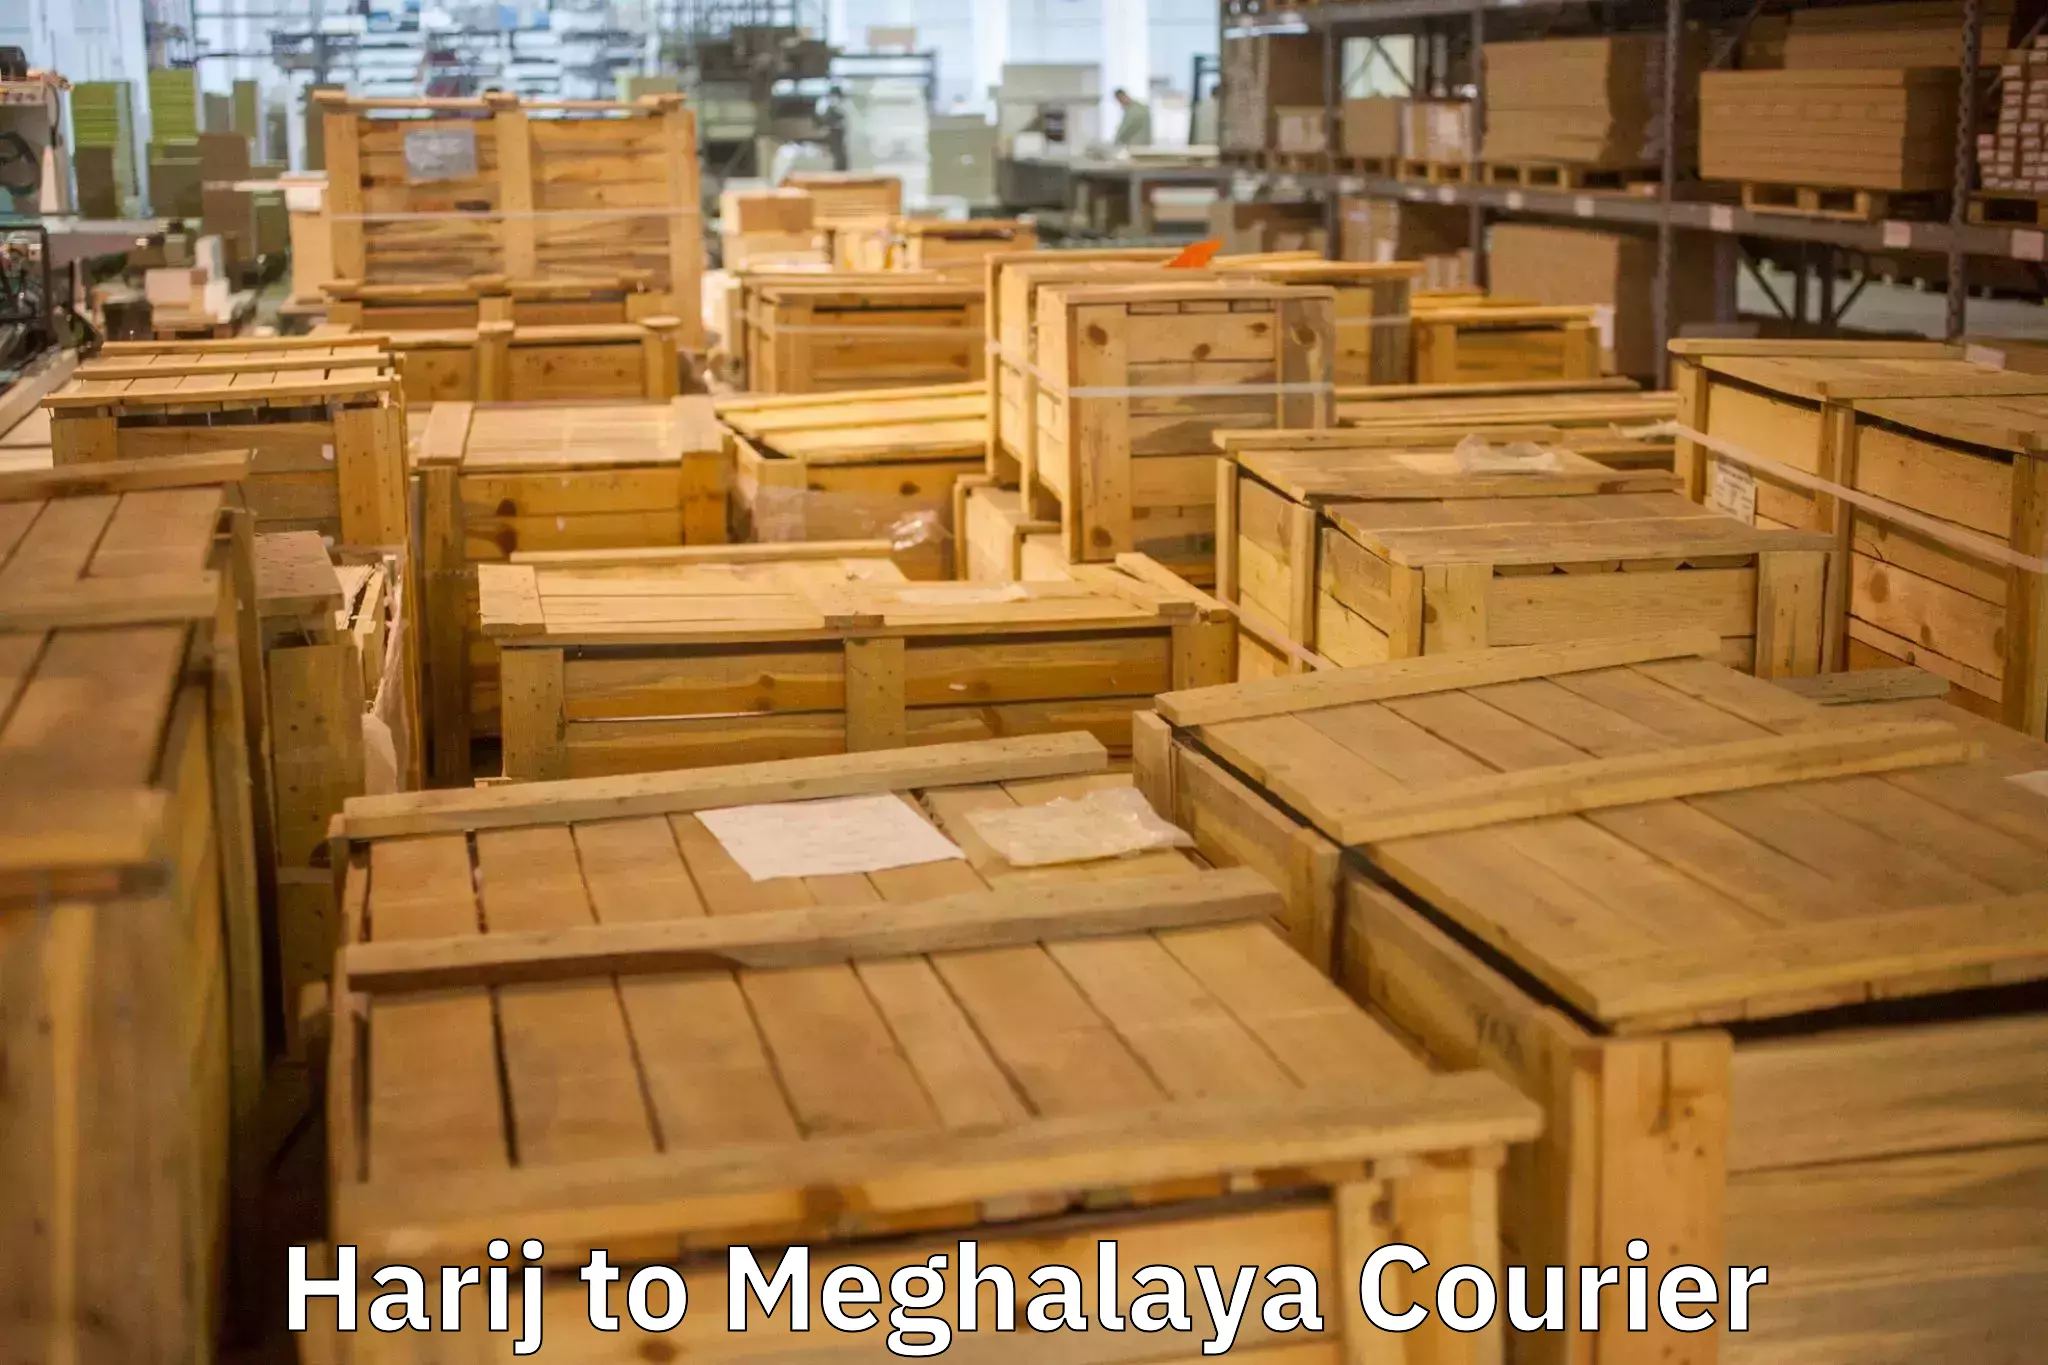 Efficient packing and moving Harij to Meghalaya